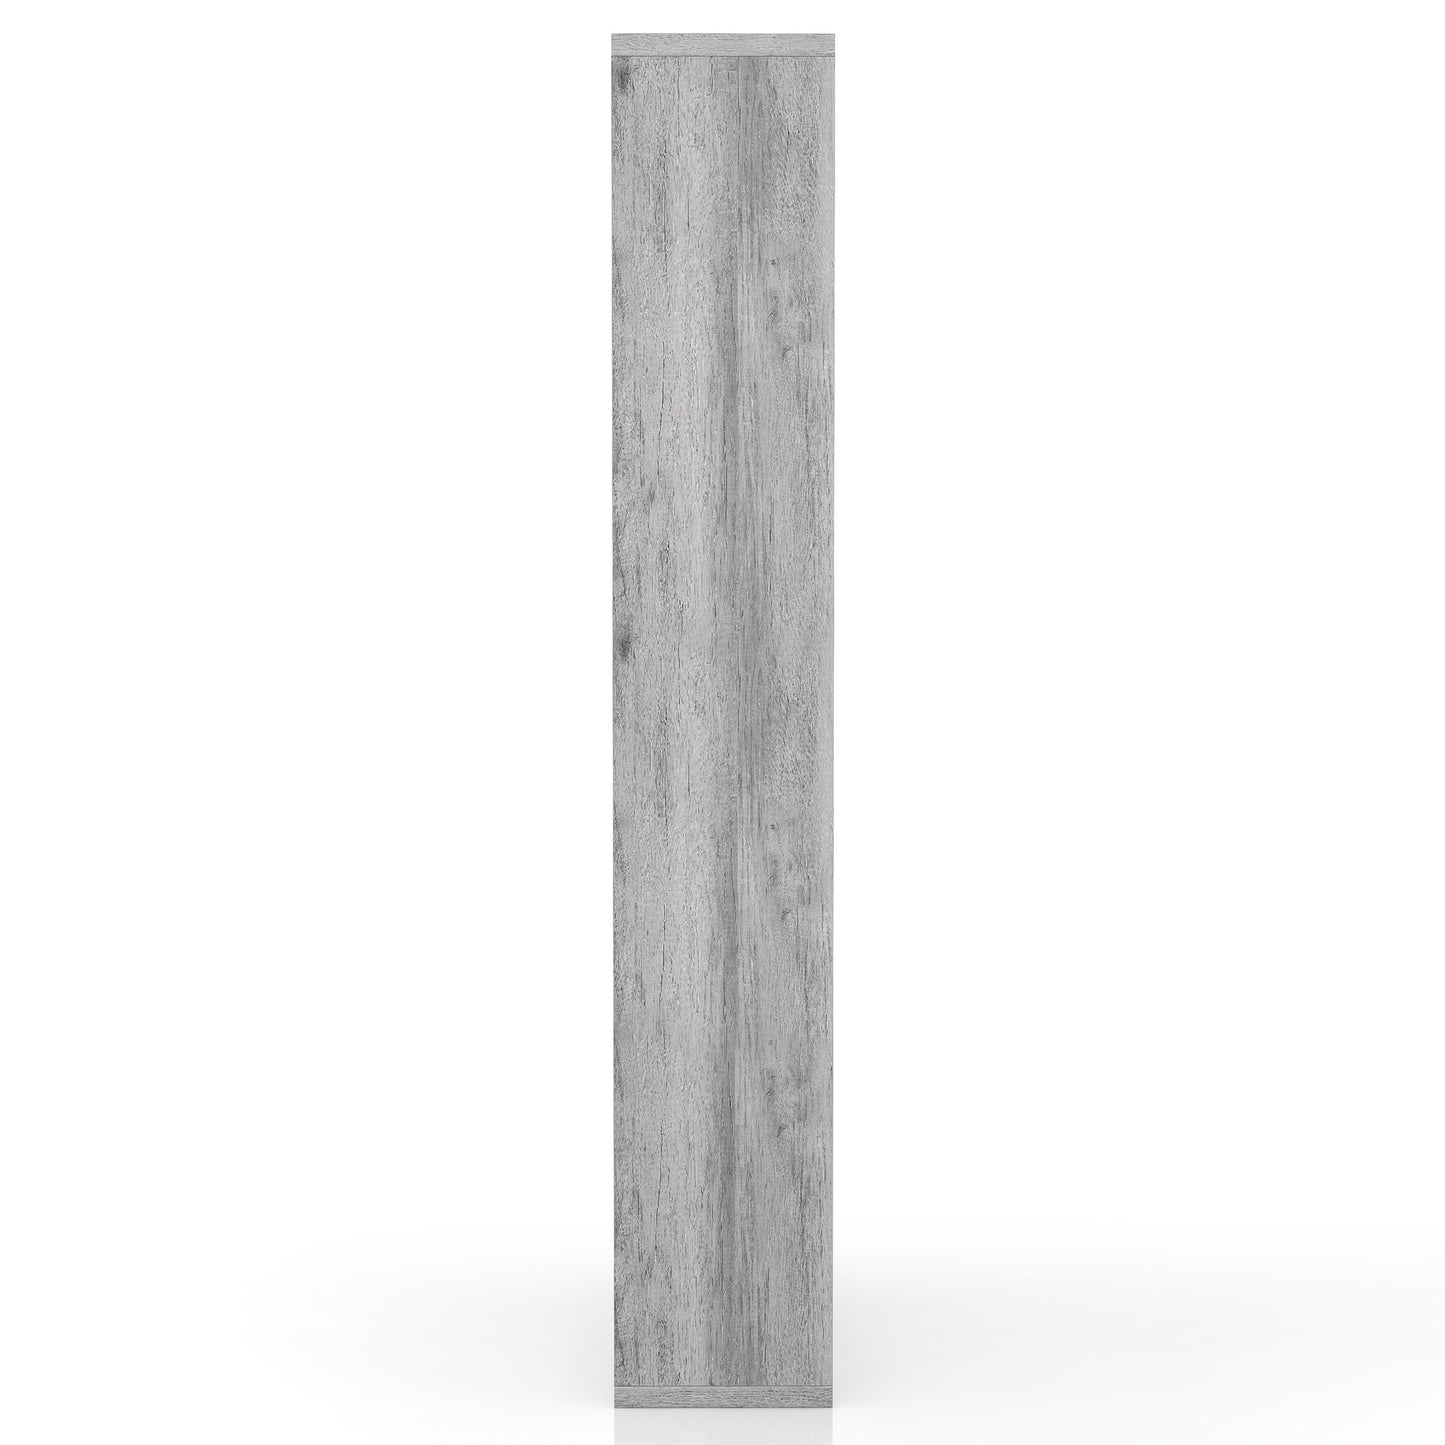 Front-facing side view of a modern vintage gray oak geometric open display bookcase on a white background